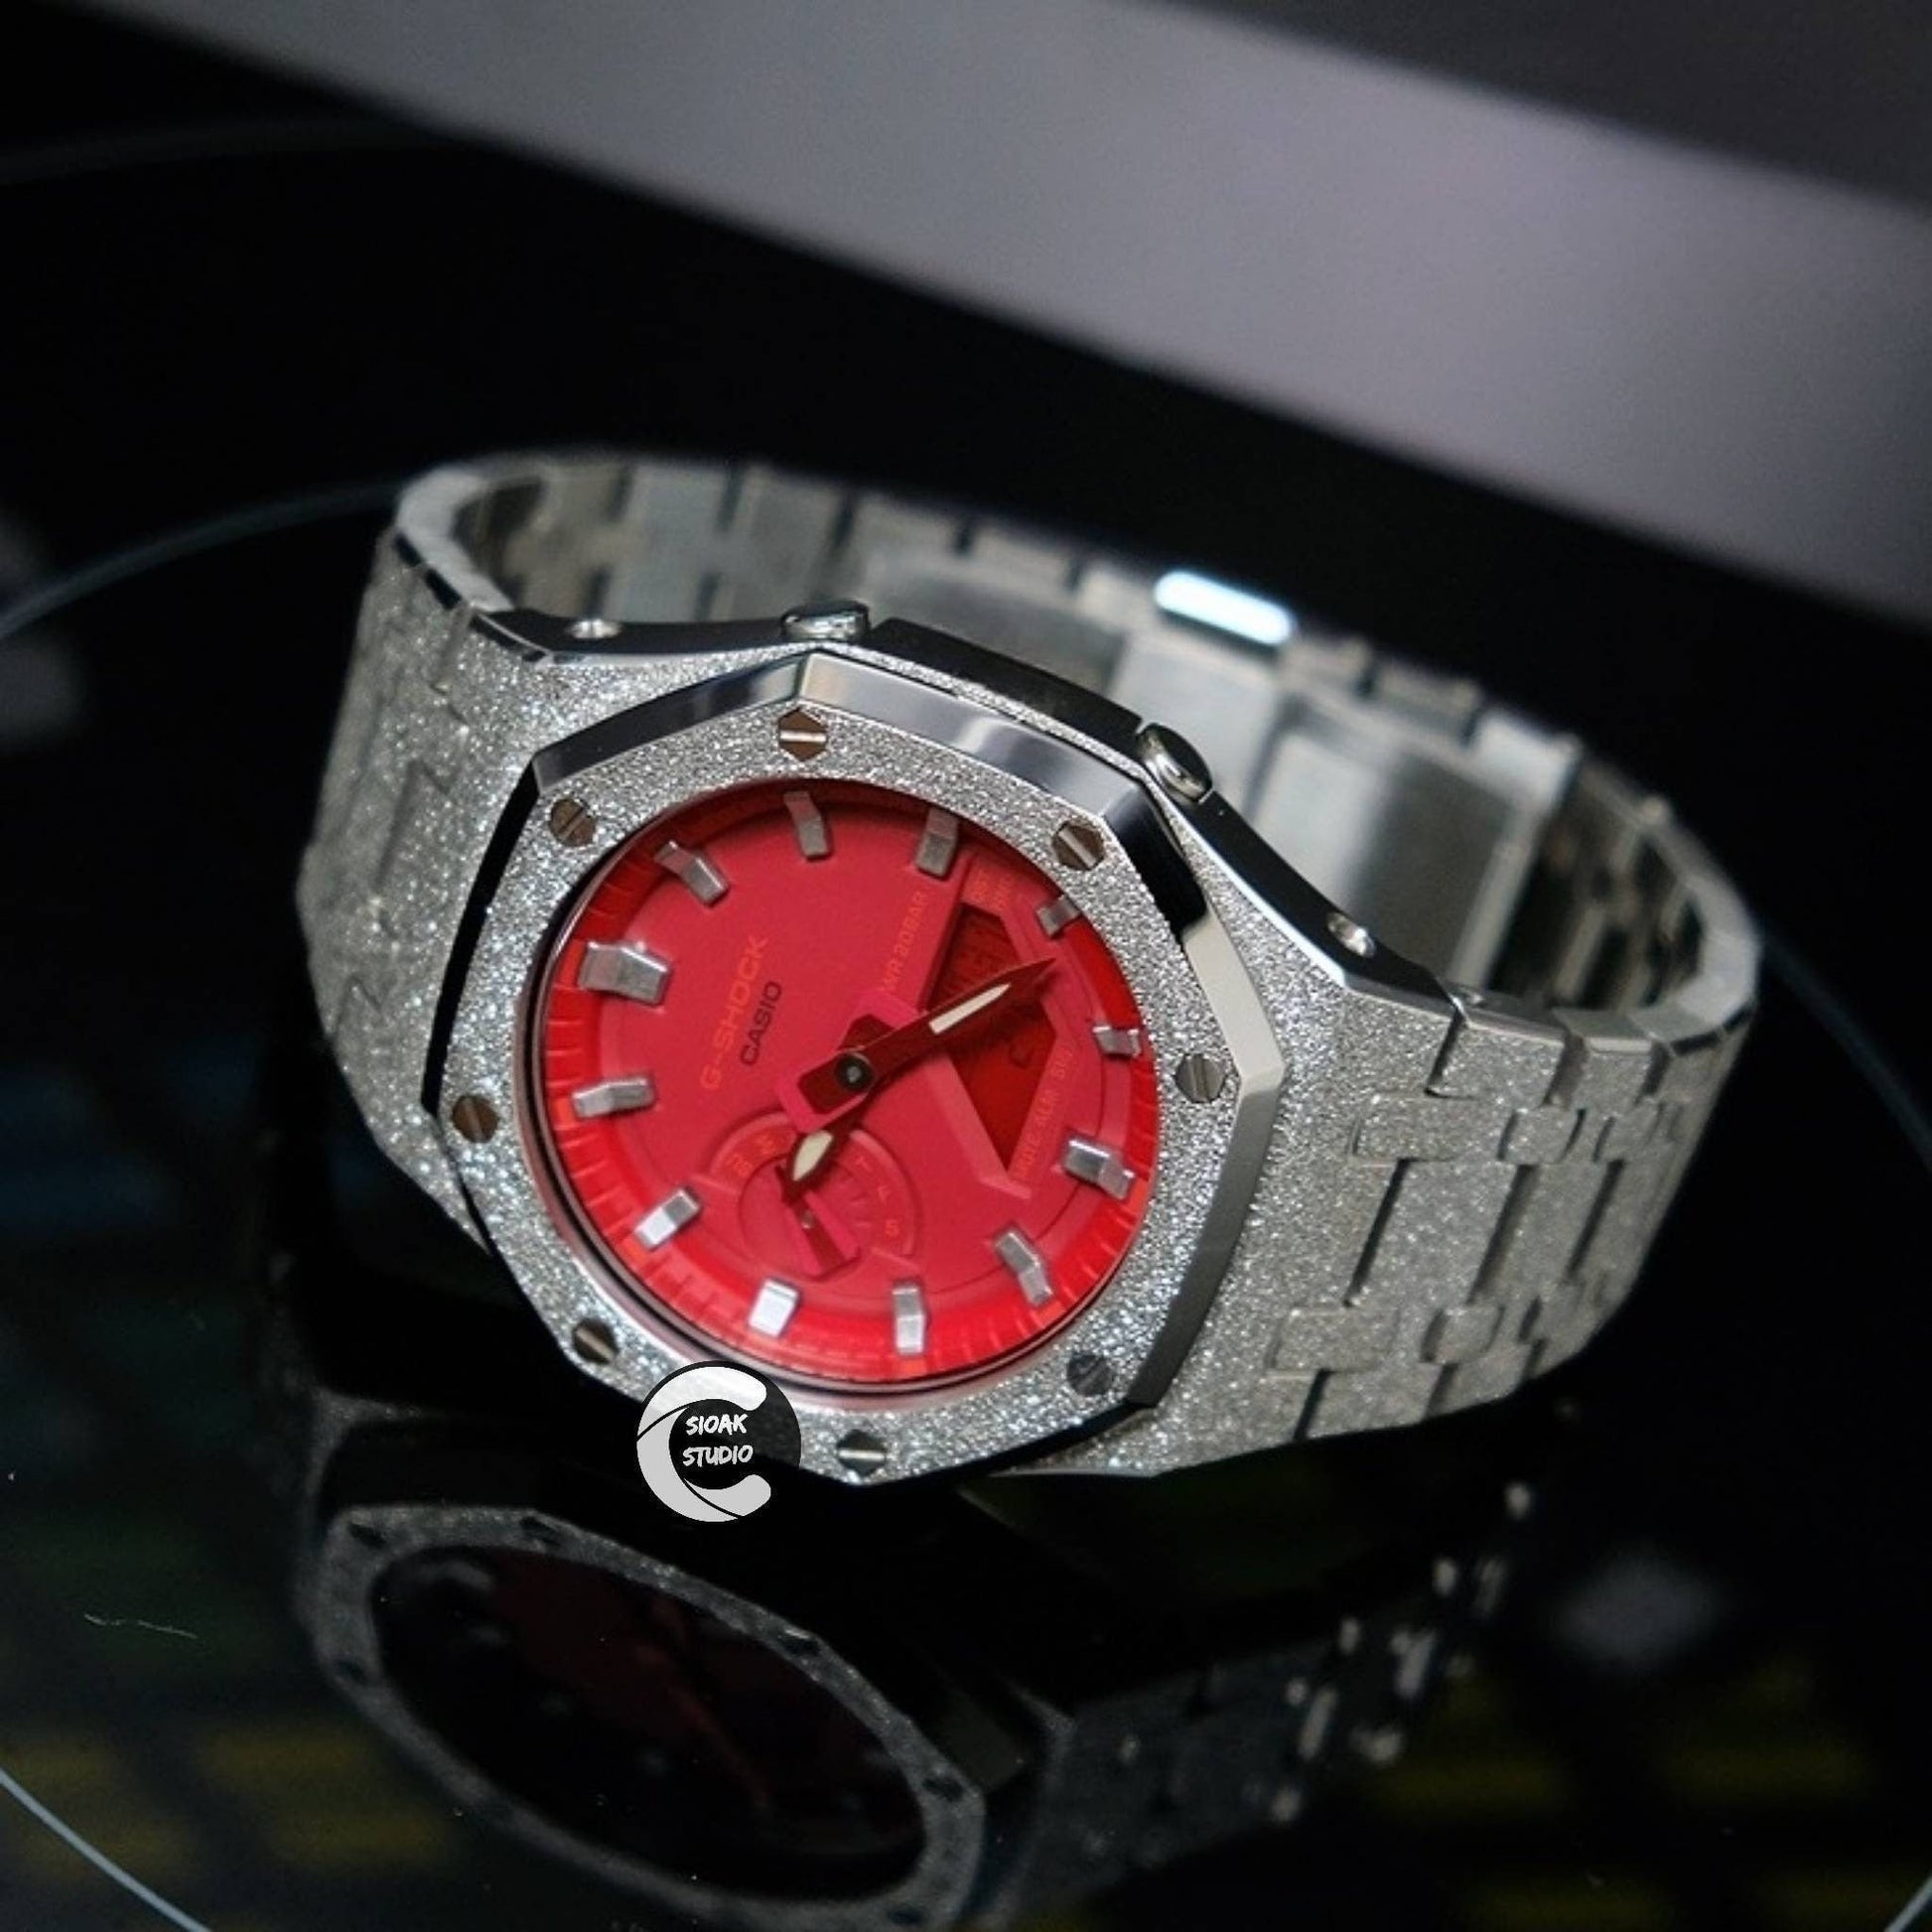 Casioak Mod Watch Frosted Silver Case Metal Strap Red Silver Time Mark Red Dial 44mm - Casioak Studio